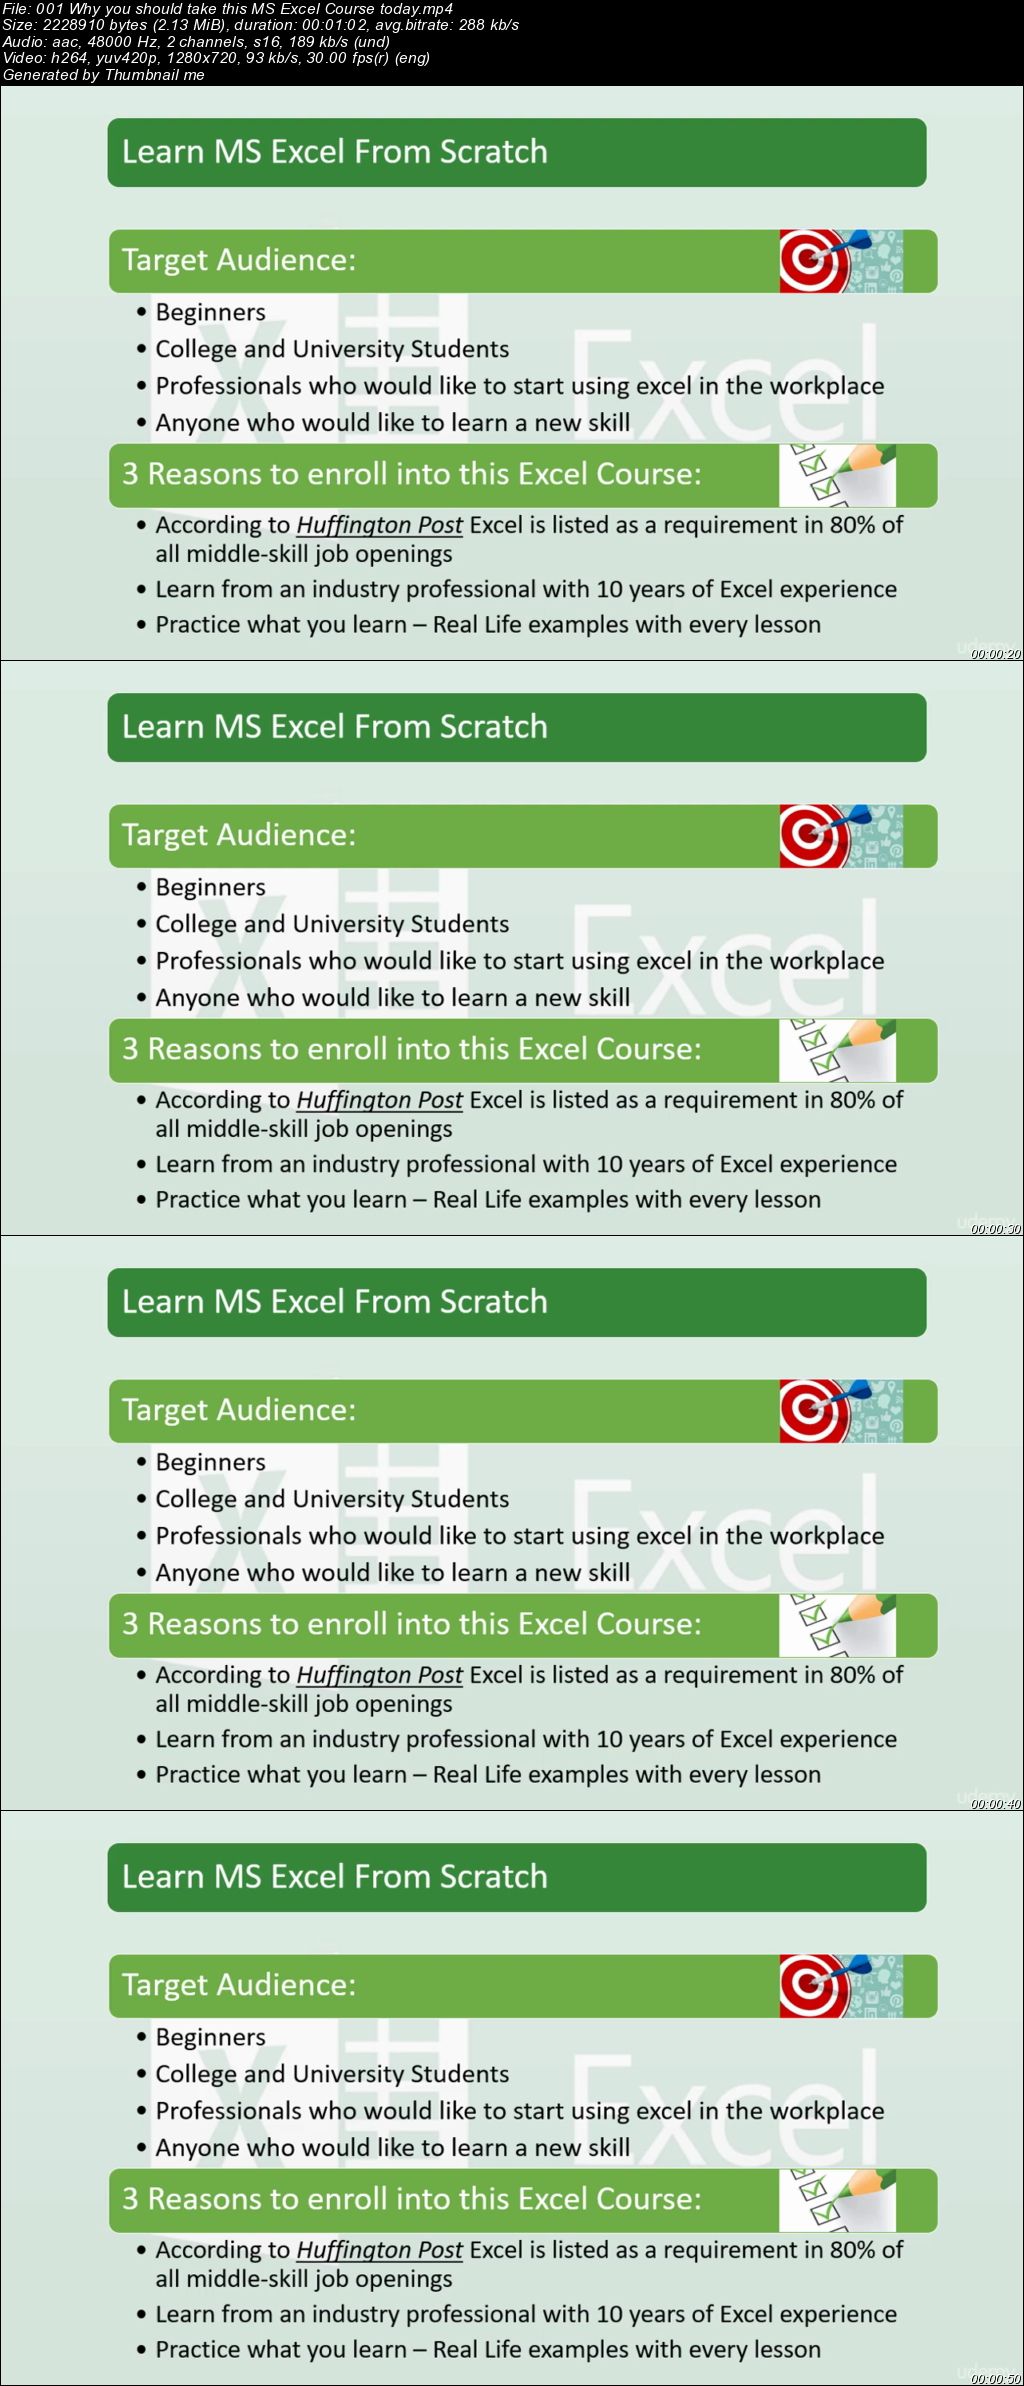 Learn MS Excel from Scratch